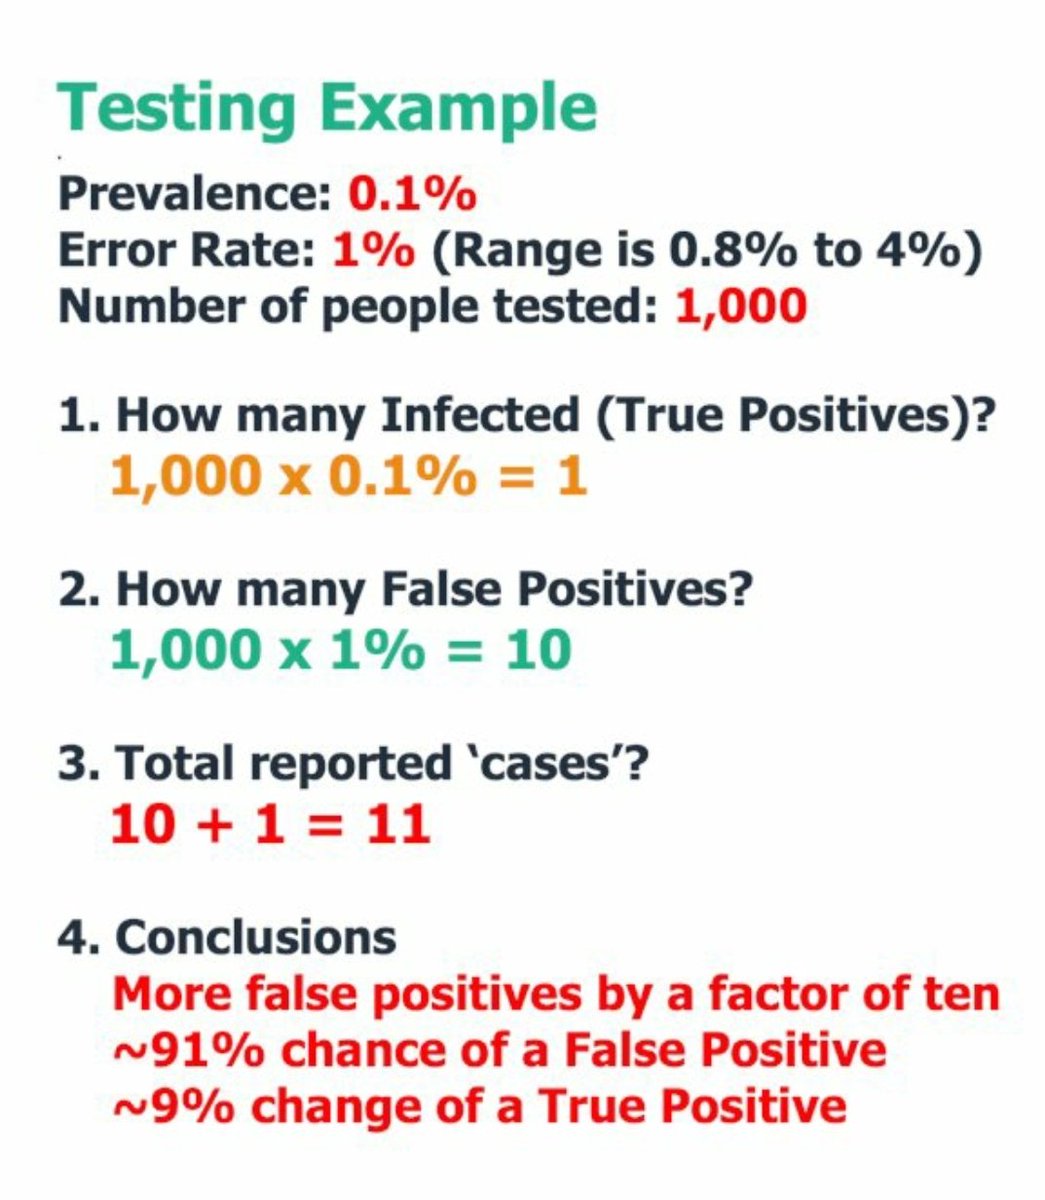 When you test 1,000 people with an error rate of 1%, you get a 91% chance that any positive is false, and a 9% that it is true. However, you are still only testing for SARSCoV2 not Covid19.